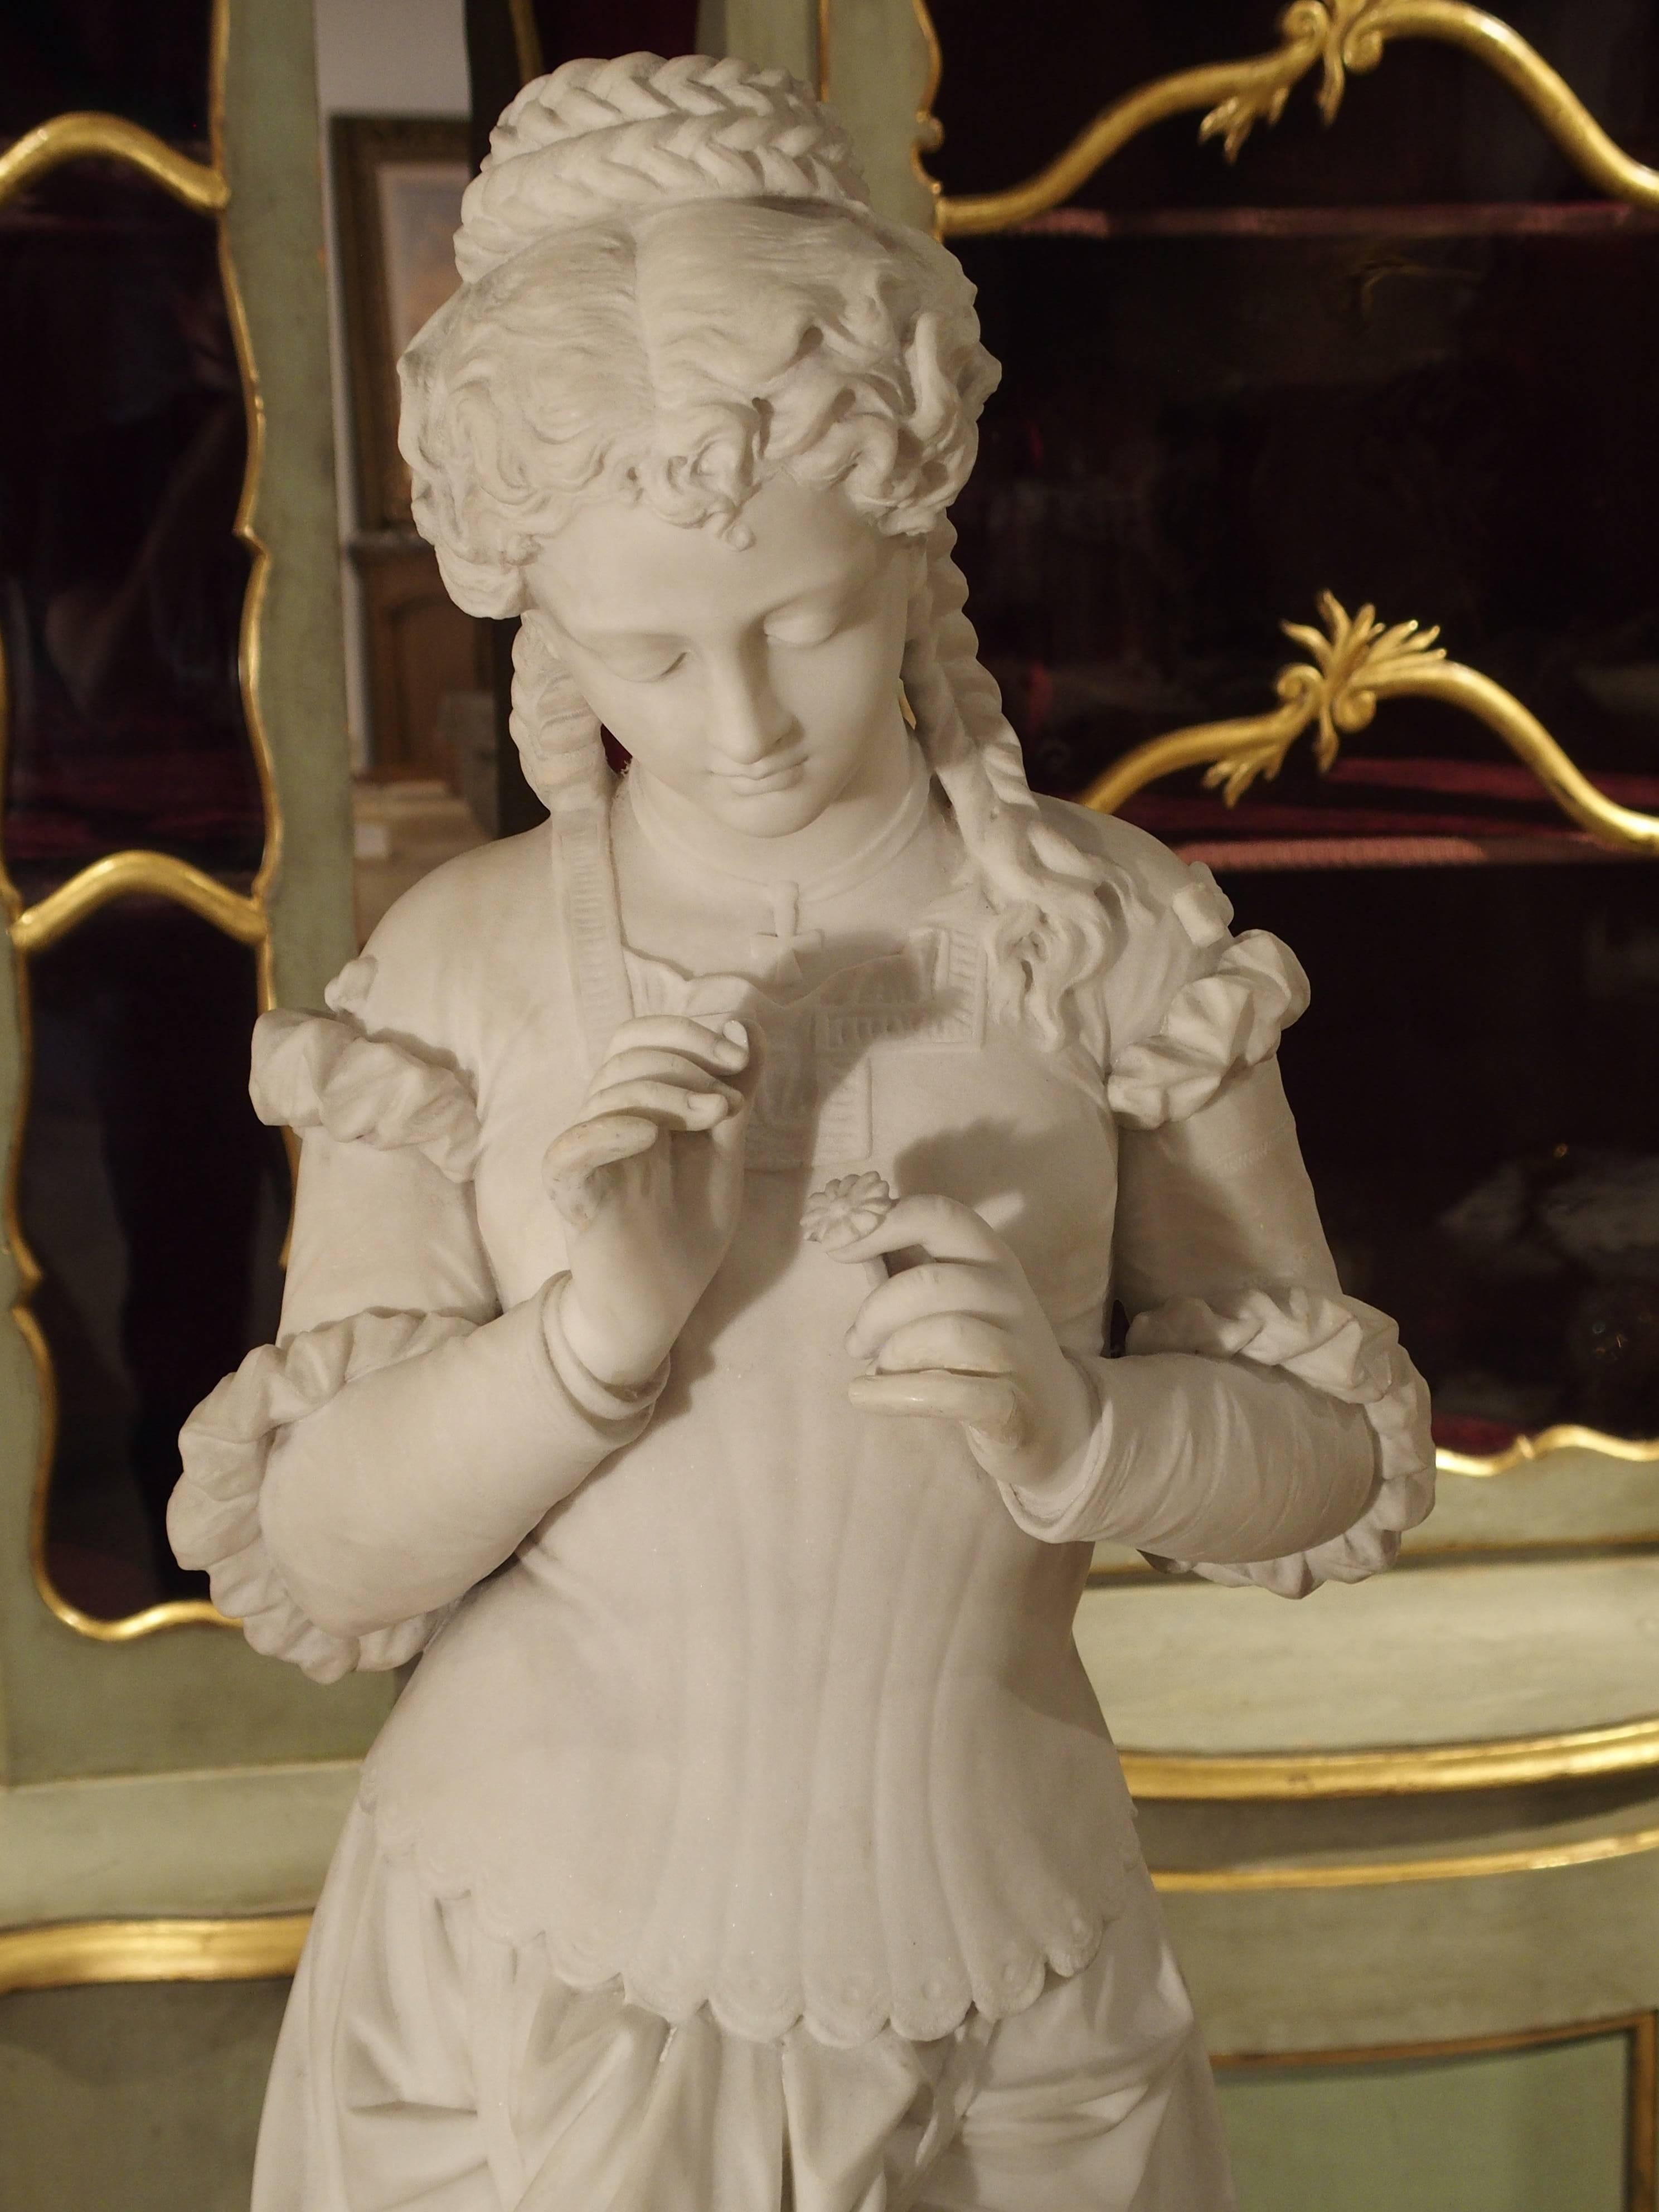 This beautiful marble statue of a young woman holding a single flower dates to the 19th century and is of the Italian school. She is shown wearing a long, dropped waist dress that is slightly hiked up by her purse. The back of the dress is cross